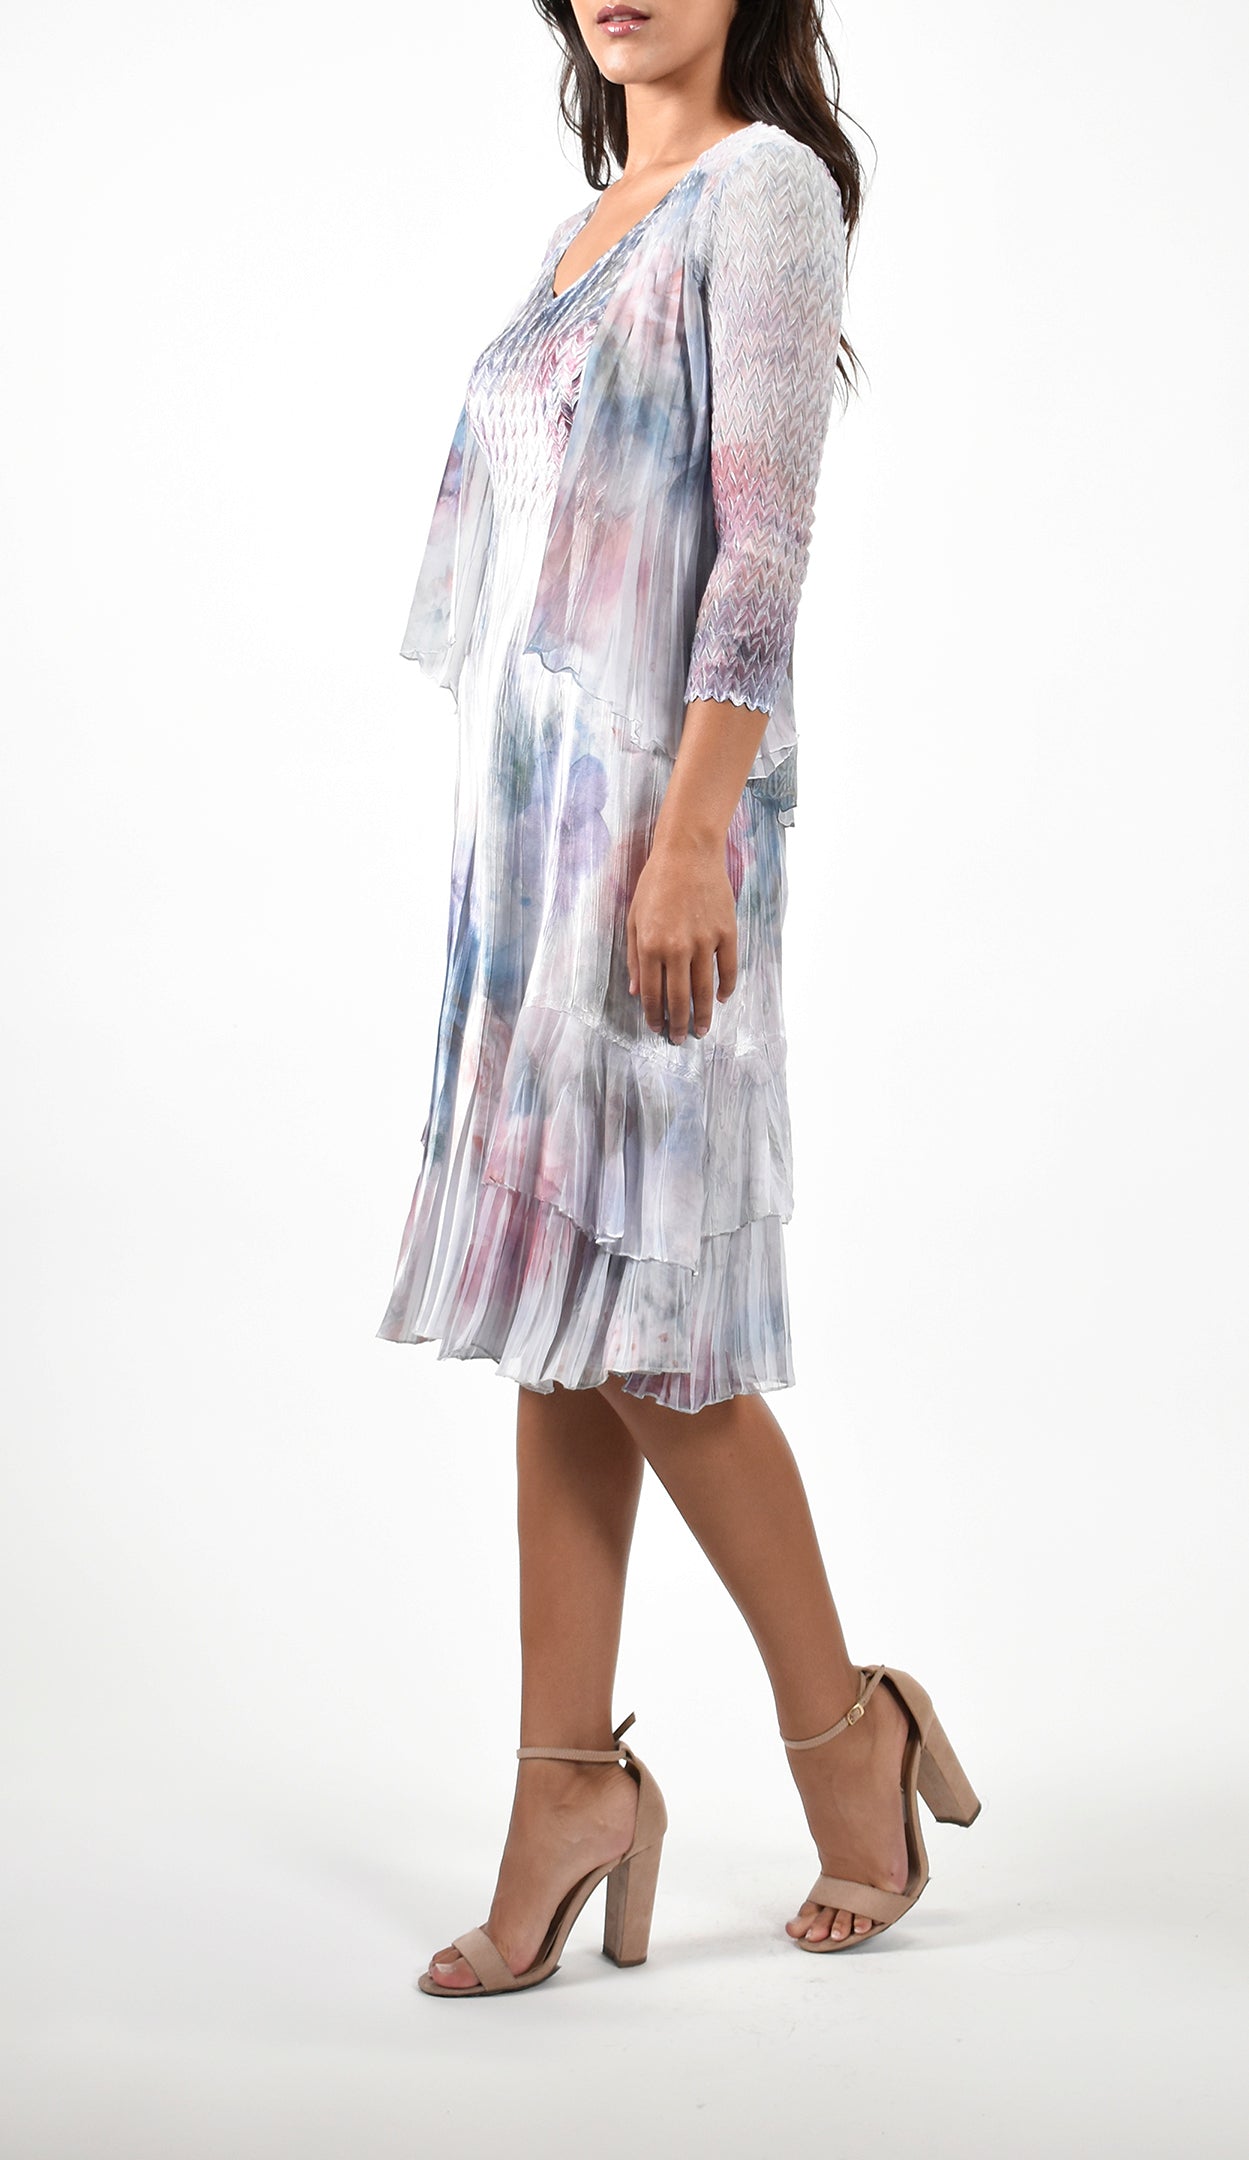 Pleated Pastel Floral Dress With Jacket